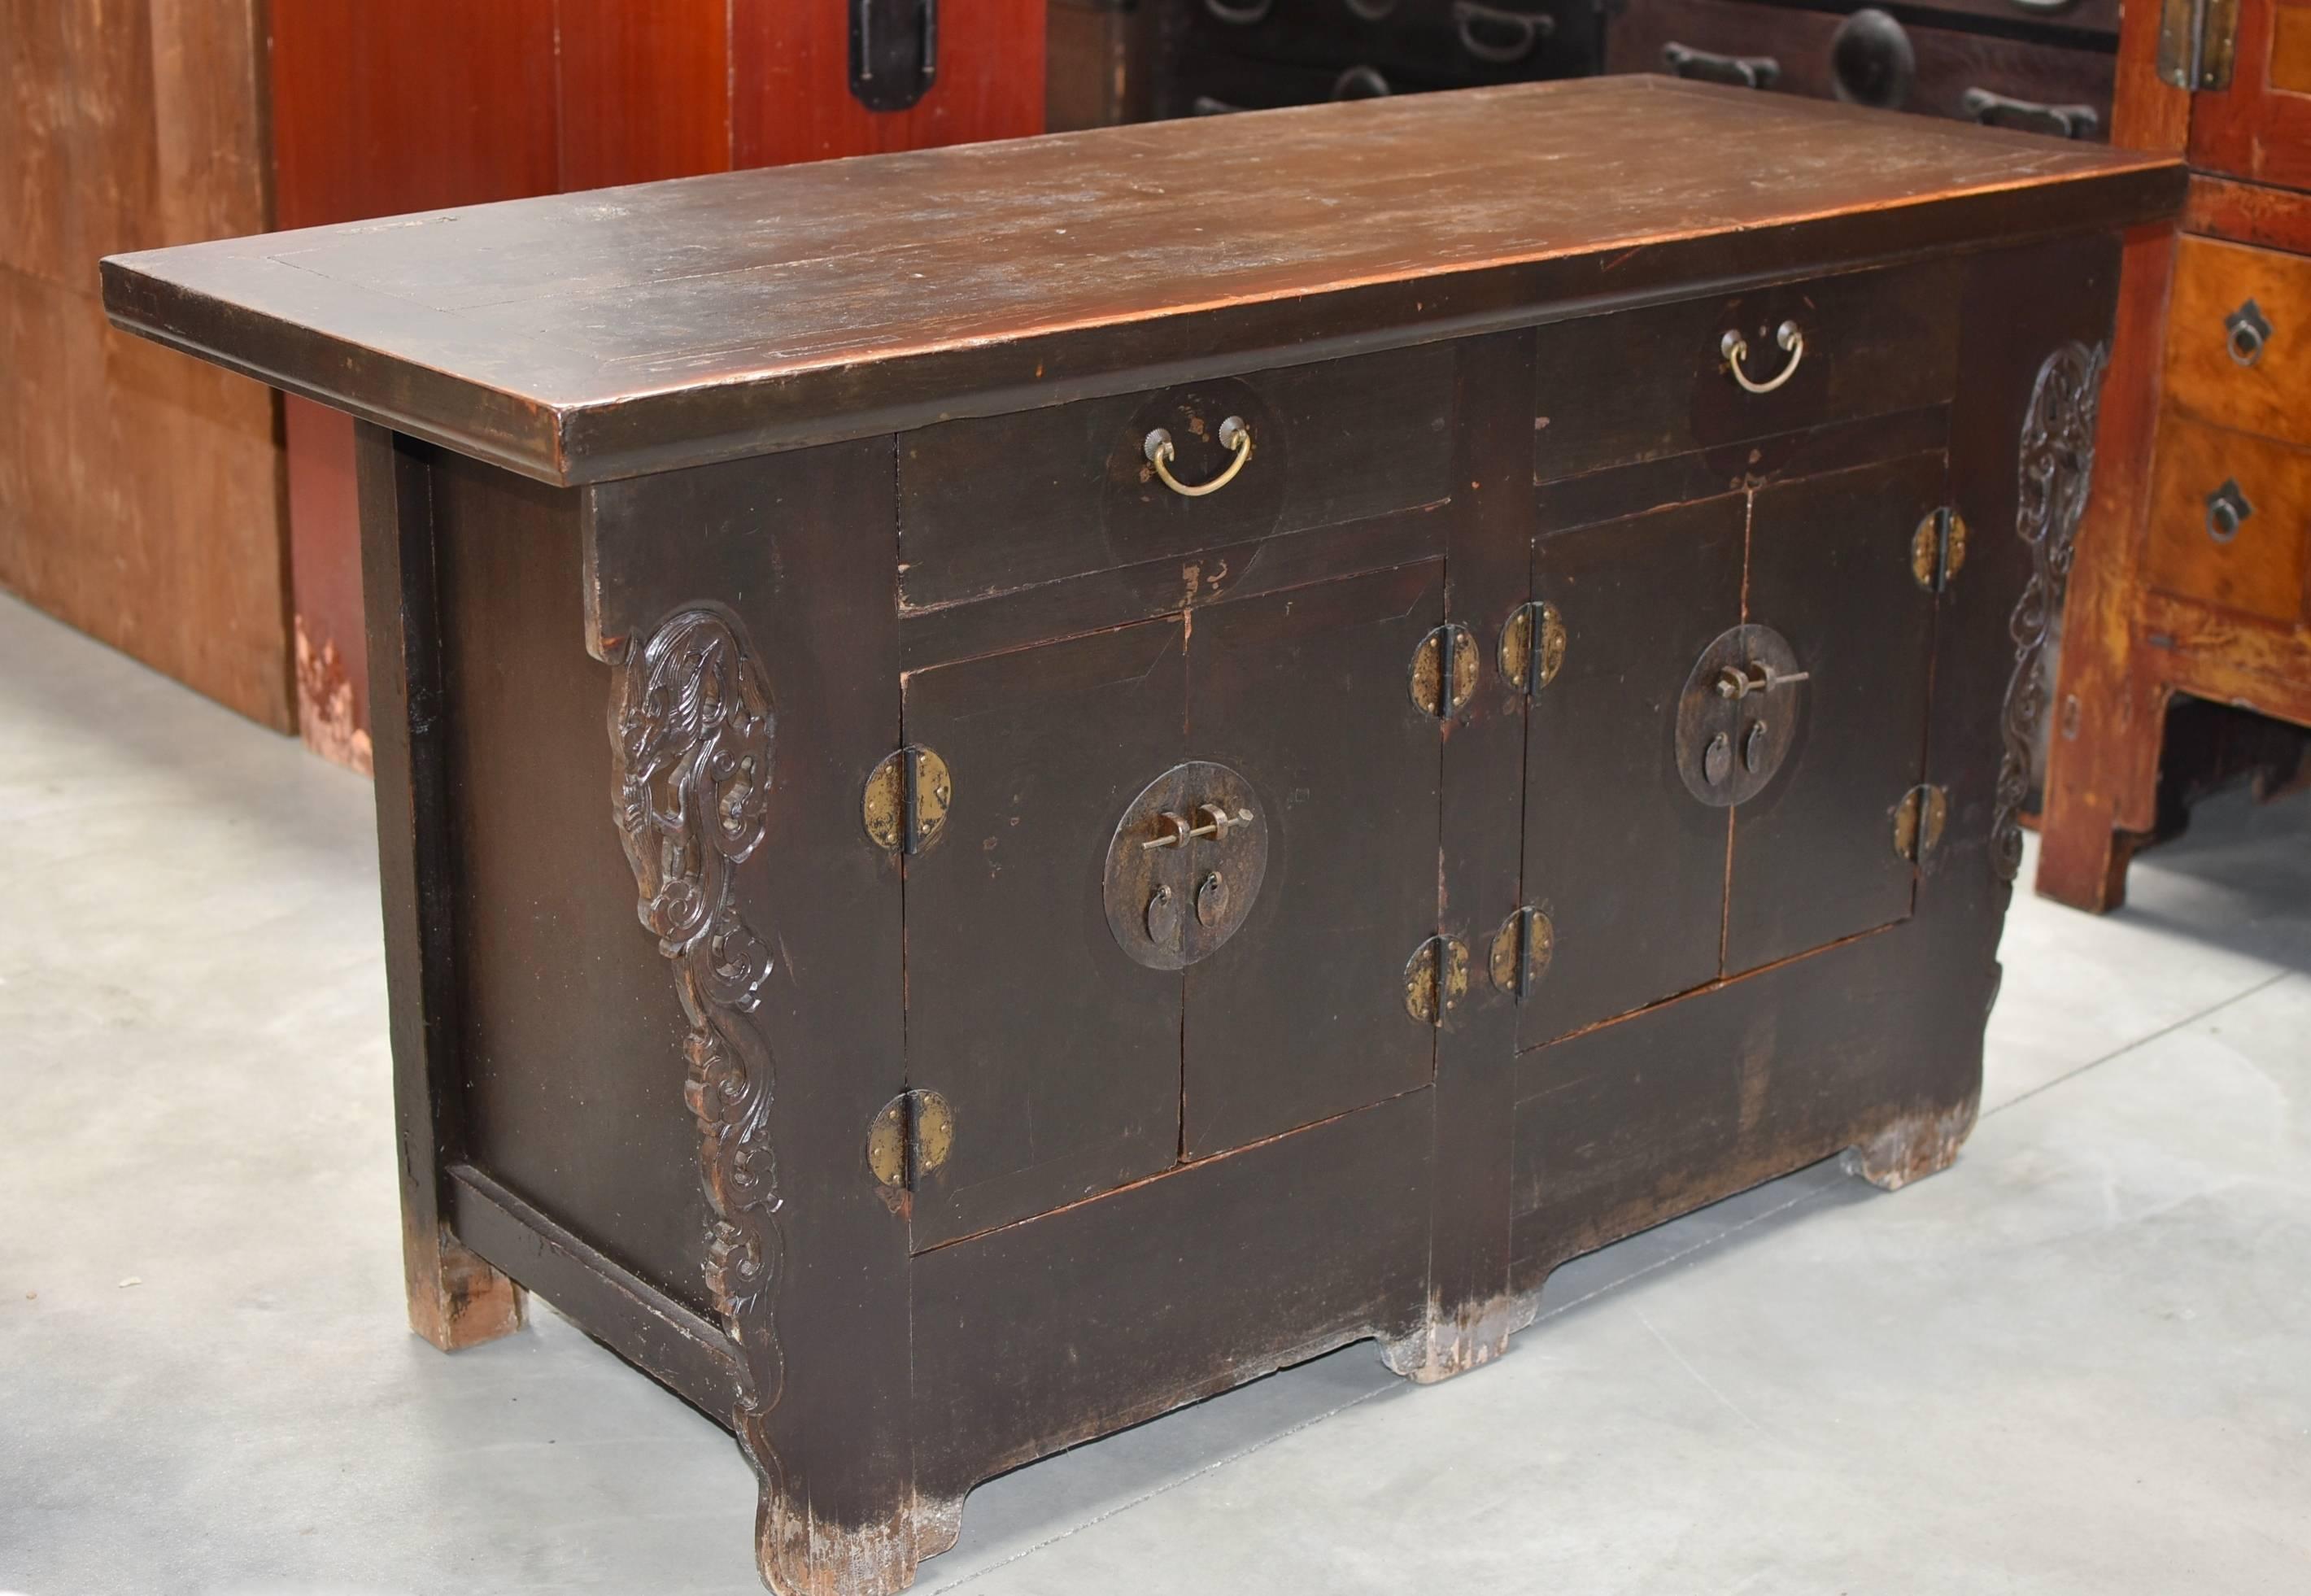 Beautiful 19th century sideboard from northern China. Solid wood construction with carvings of stylized dragons on the sides. Original top in excellent condition has beautiful patina. Drawers and internal shelves provide ample storage. A great piece